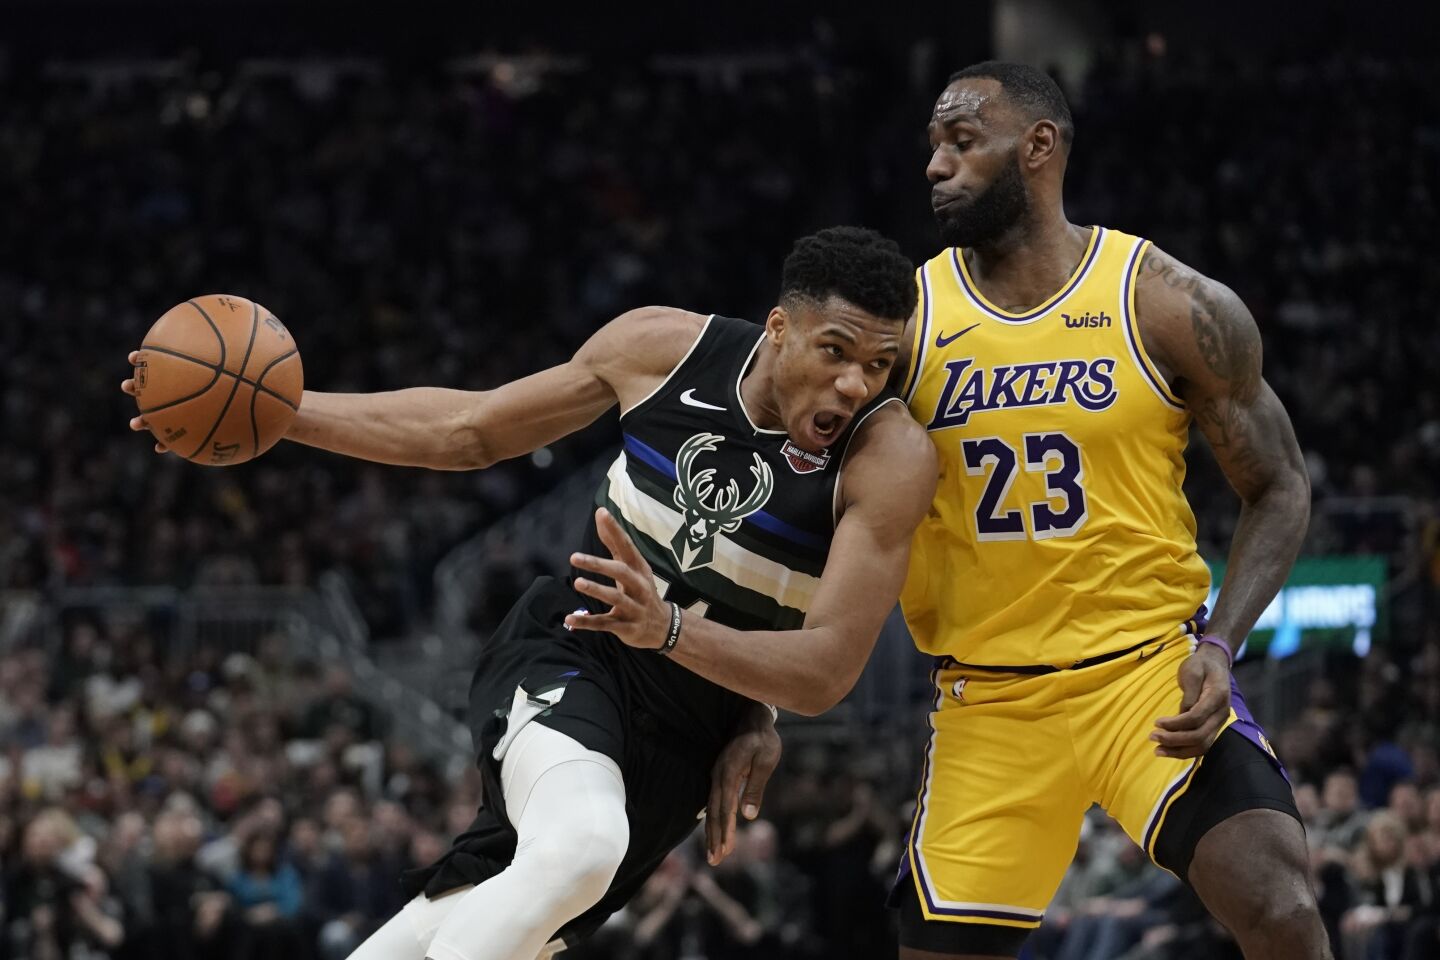 Giannis Antetokounmpo tries to drive past LeBron James during the second half of a game Dec. 19.